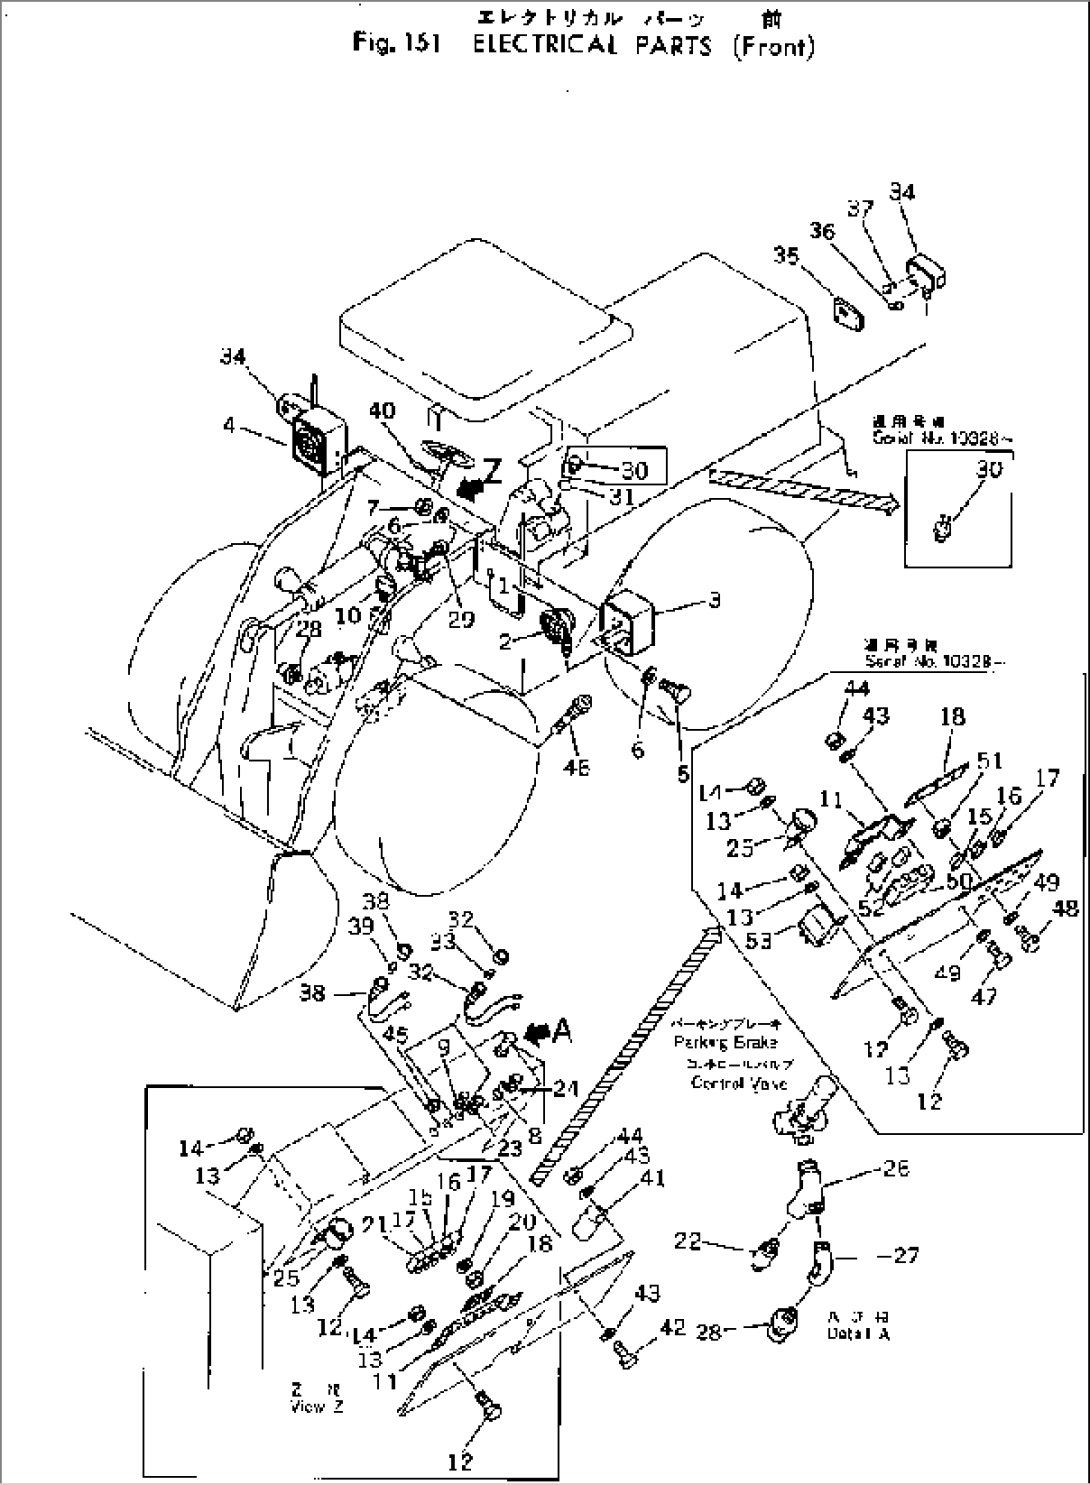 ELECTRICAL PARTS (FRONT)(#10001-)